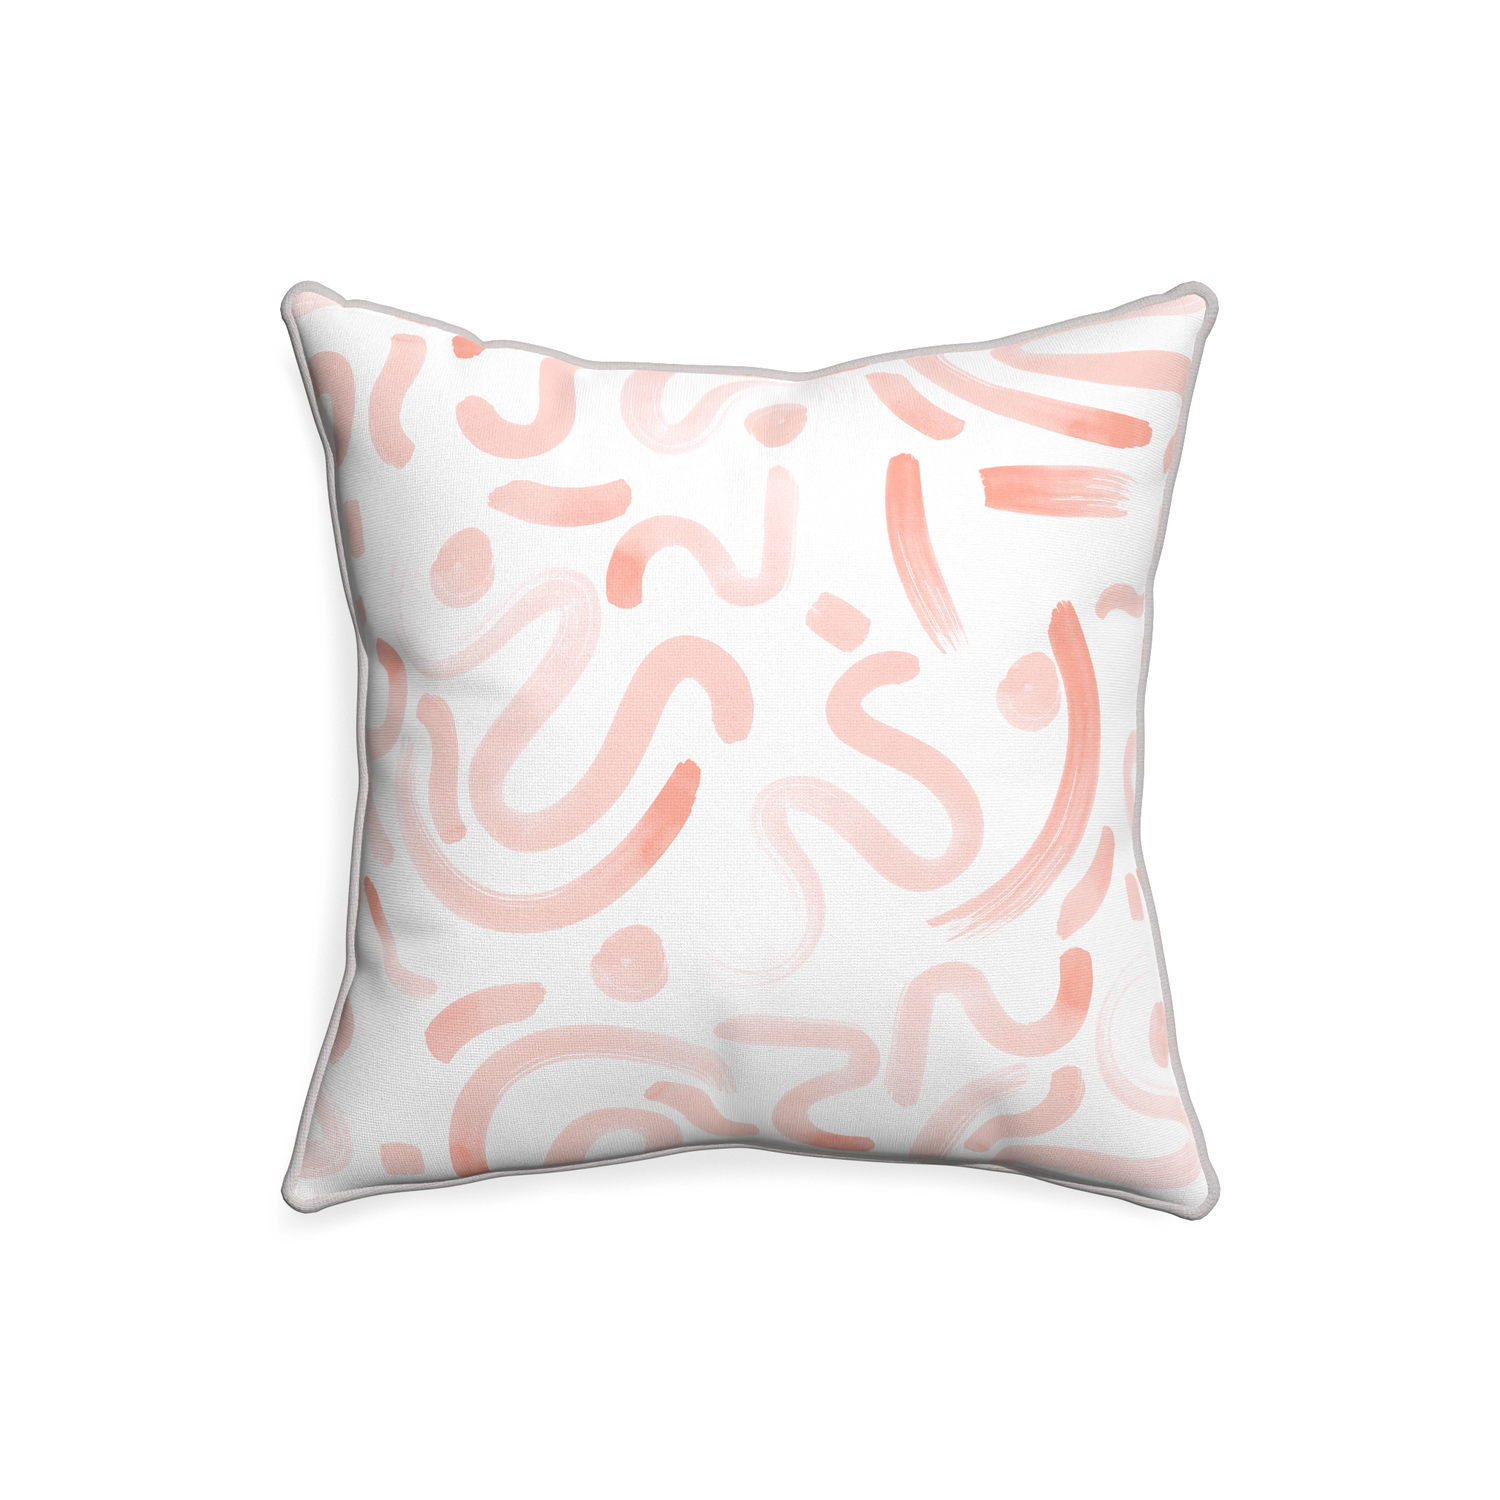 20-square hockney pink custom pillow with pebble piping on white background